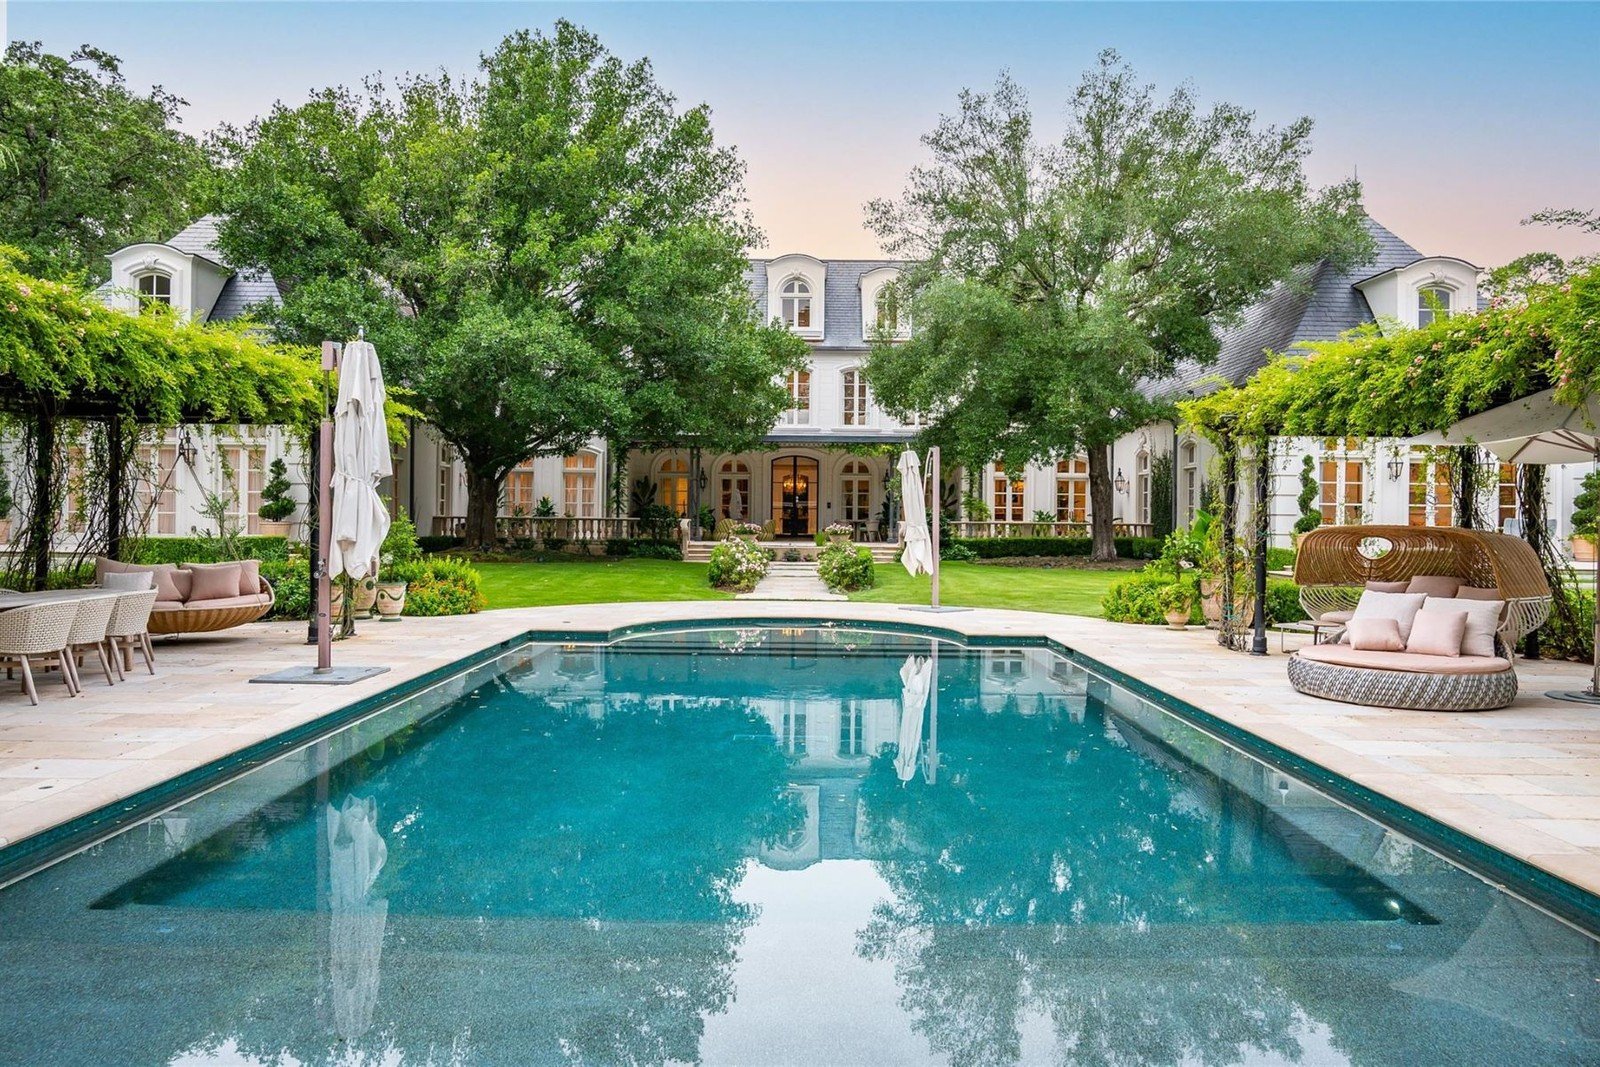 Francis York French Chateau-Style Mansion in Houston, Texas m00048.jpeg